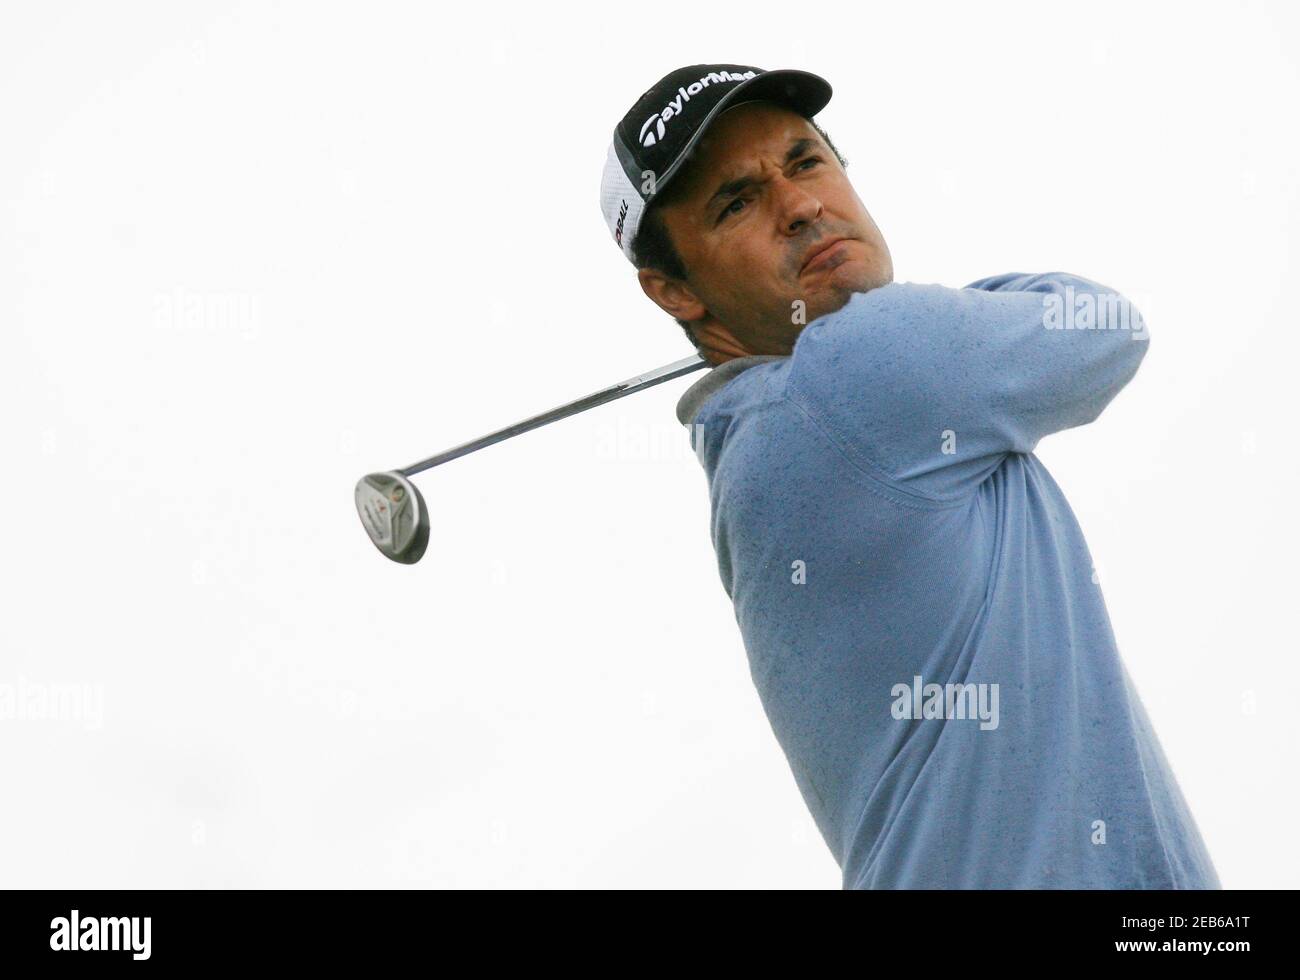 Golf - The KLM Open - Kennemer Golf & Country Club, Zandvoort, The  Netherlands - 21/8/08 England's Simon Khan tees off at the fourth hole  during the first round Mandatory Credit: Action